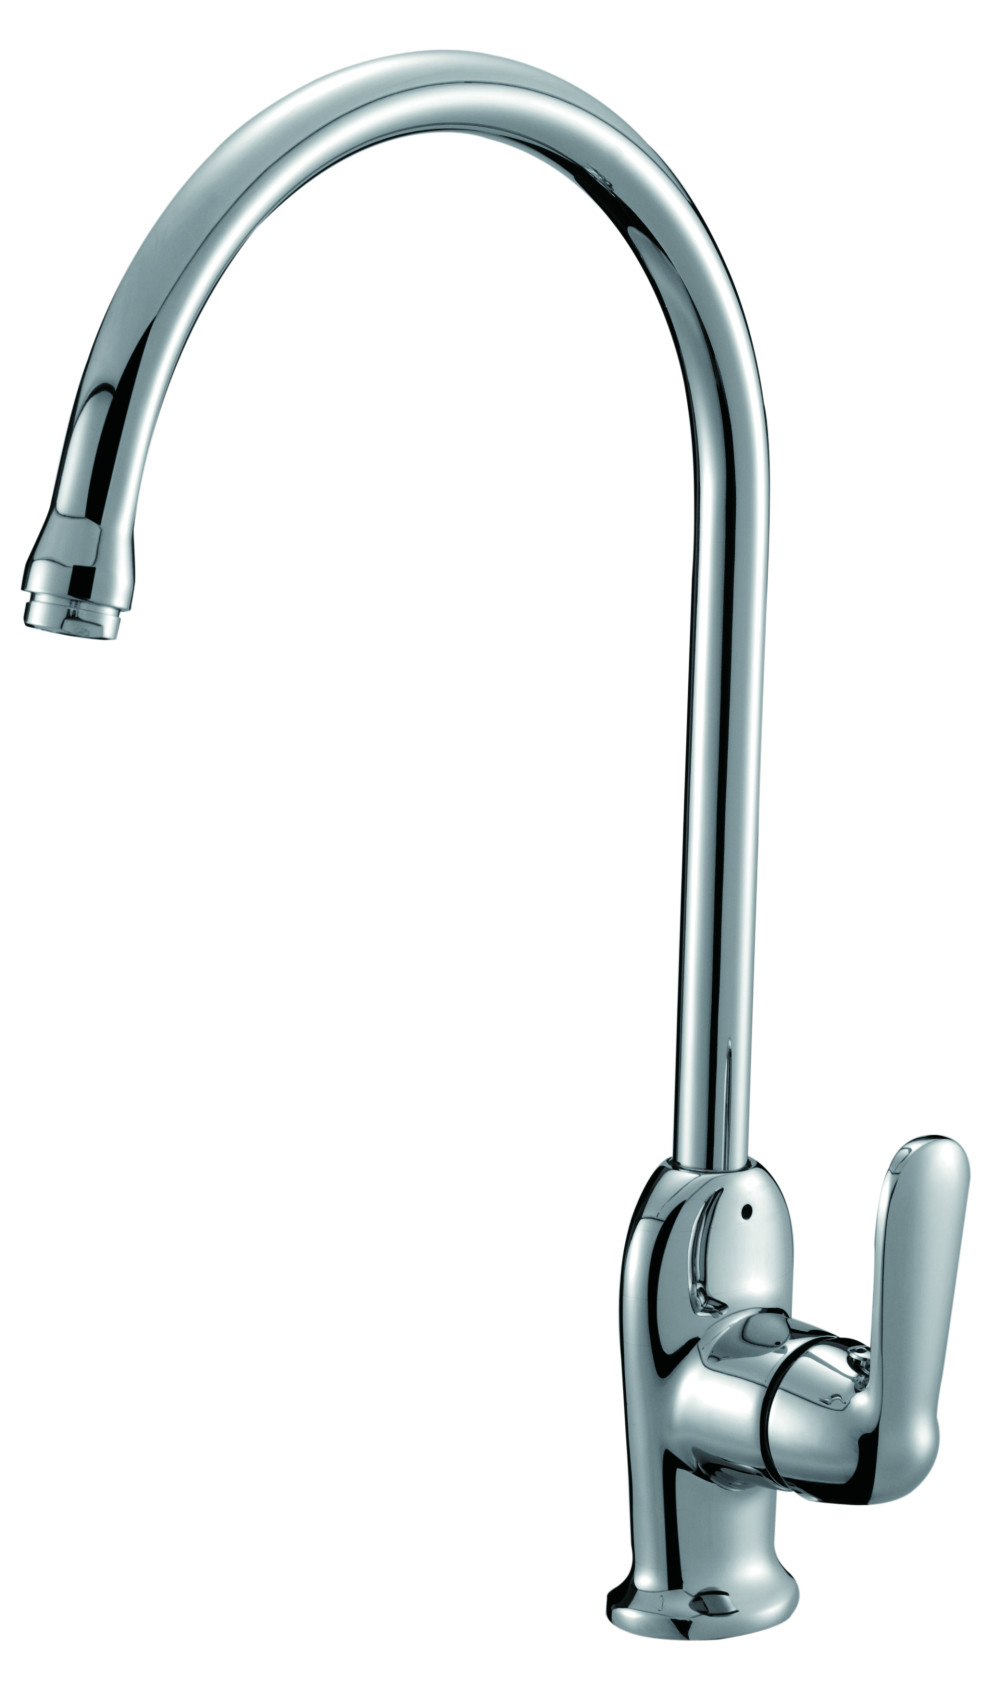 Pull-out Chrome Finish Soild Brass Kitchen Faucet Single Handle Mixer Tap